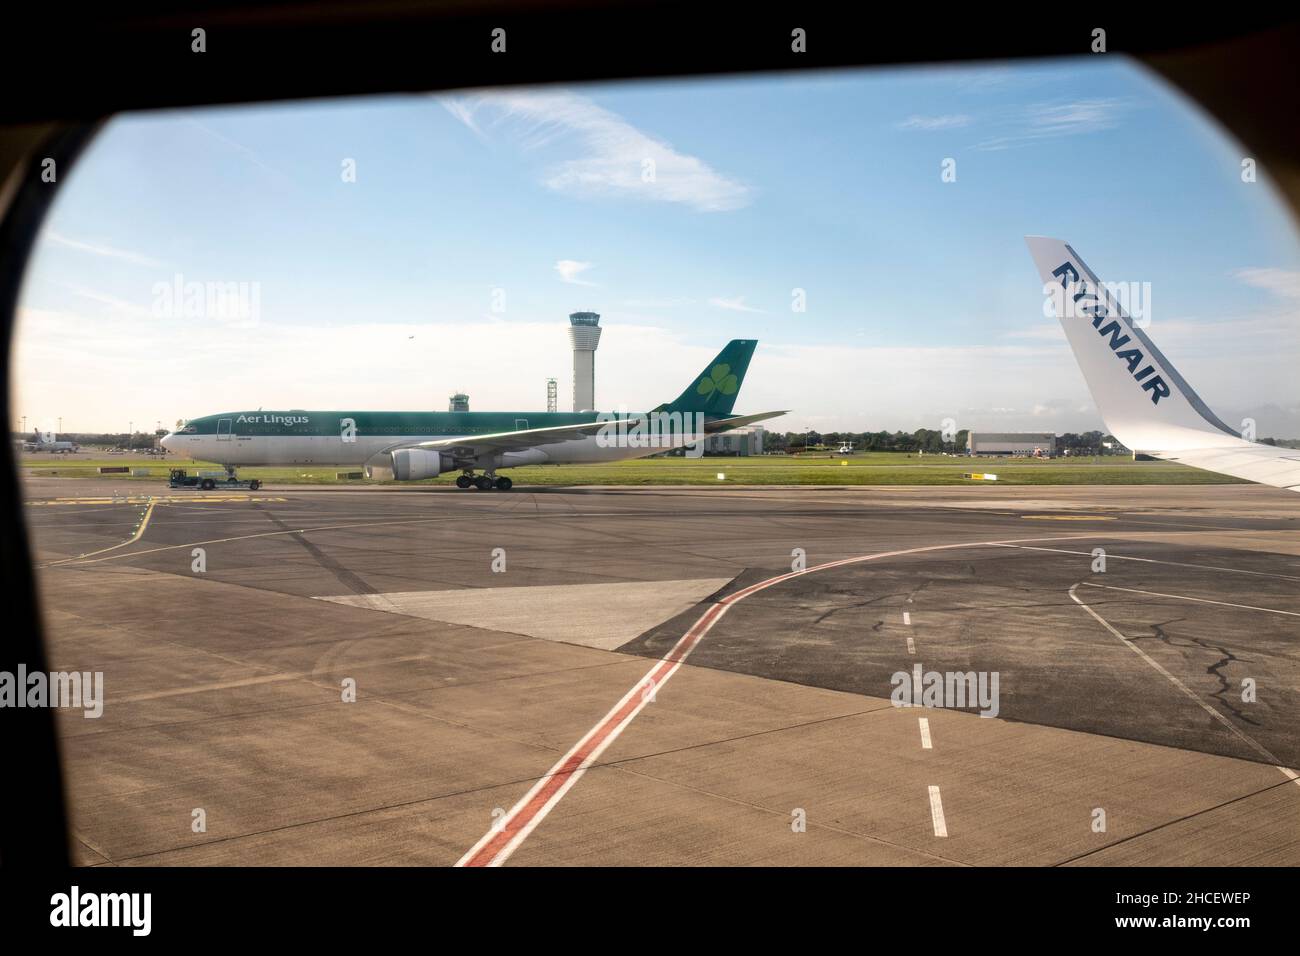 View from inside a Ryanair flight to an Aer lingus plane on the taxiway at Dublin Airport, Dublin, Ireland Stock Photo